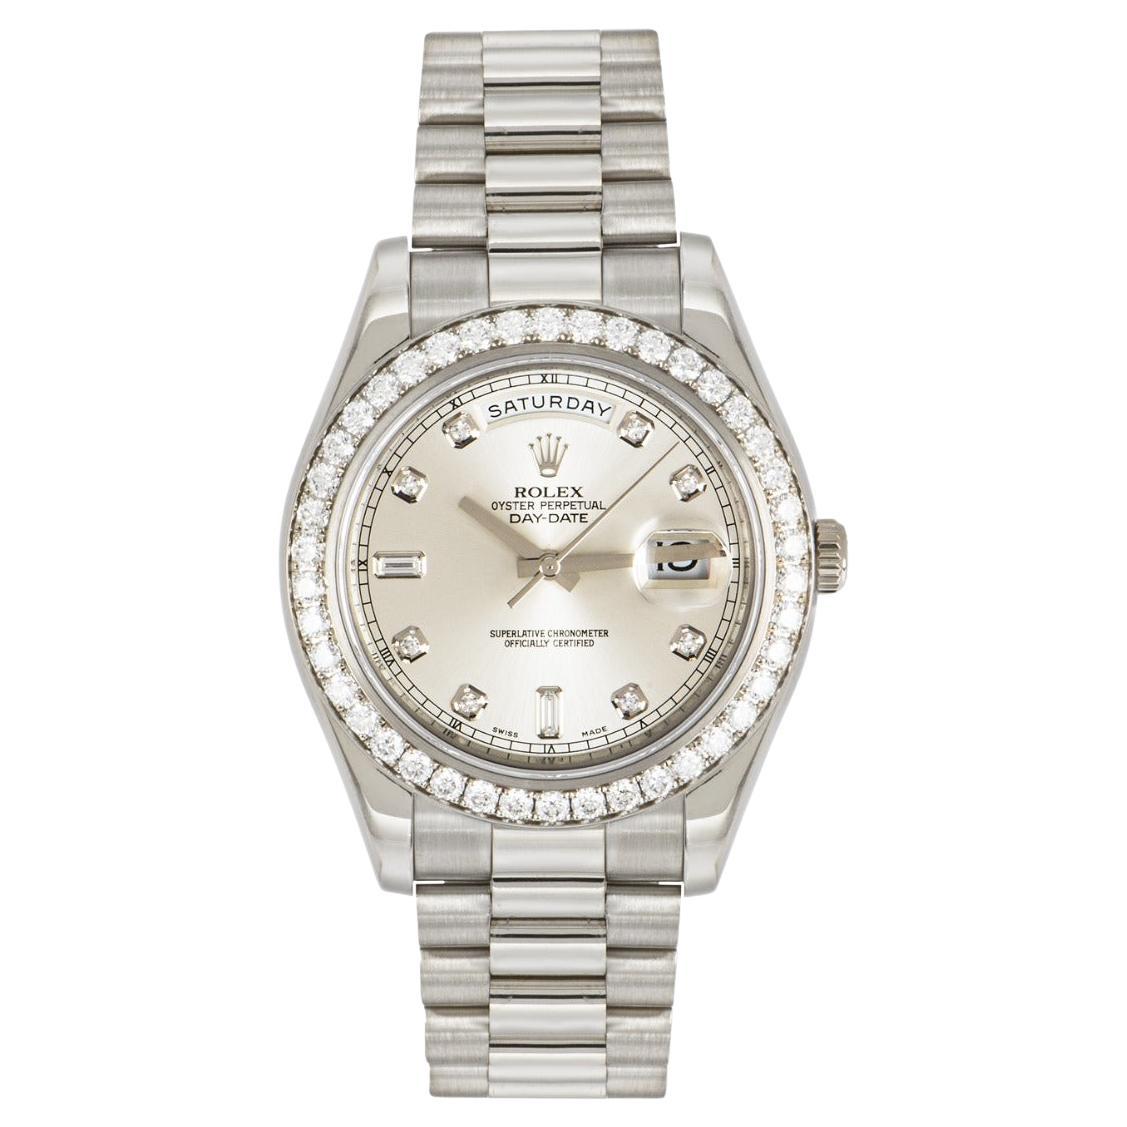 A 41mm Day-Date in white gold by Rolex. Featuring a silver dial with 8 round brilliant cut diamonds and 2 baguette cut diamonds. Complementing the dial is a fixed white gold bezel set with 42 round brilliant cut diamonds.

Equipped with a president